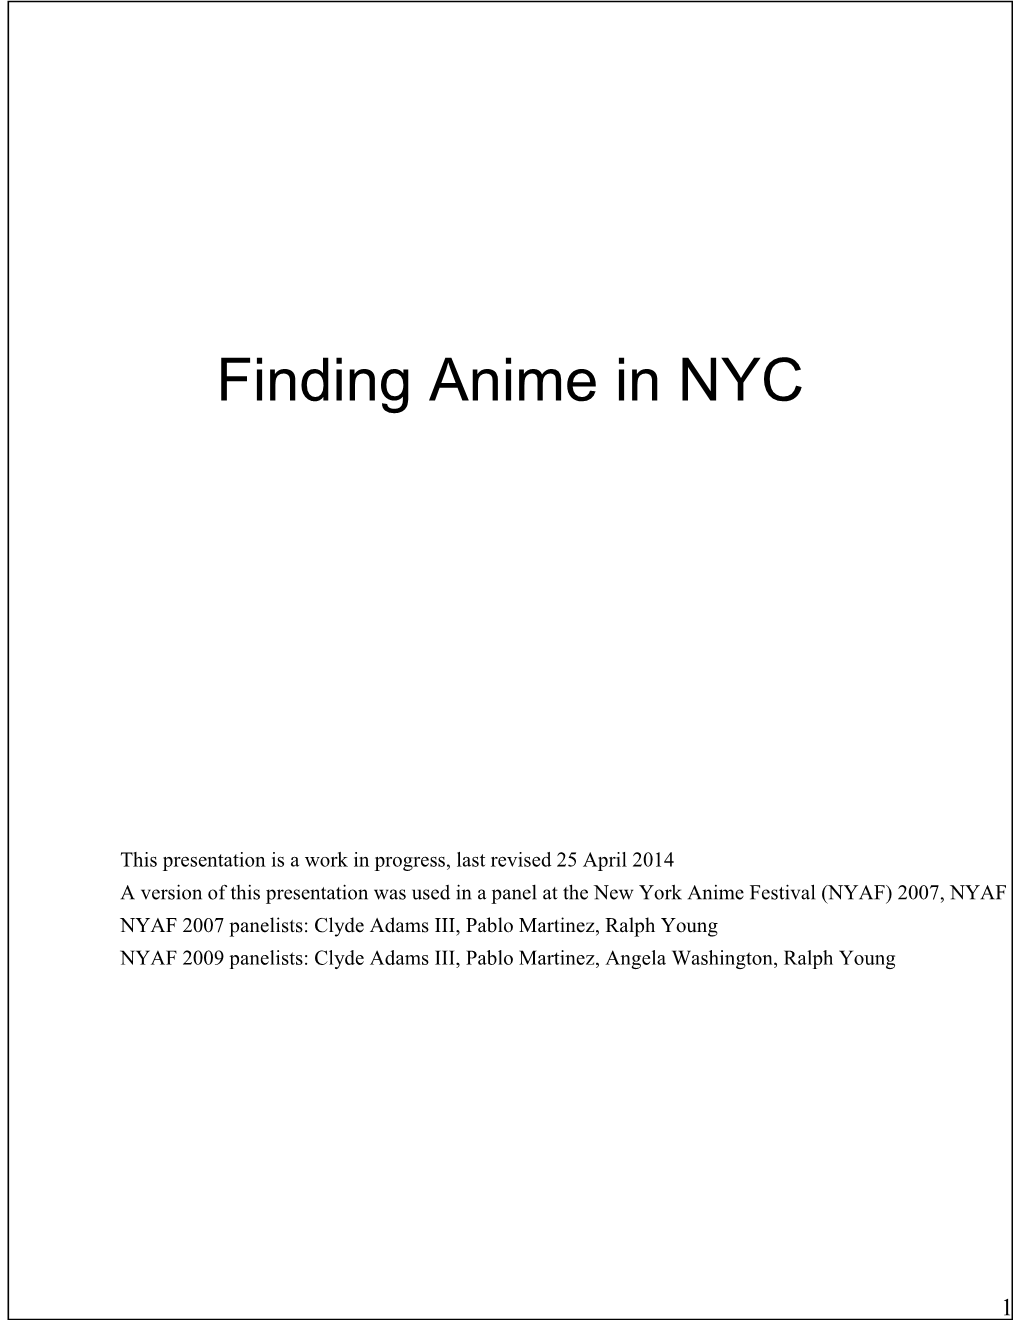 Finding Anime in NYC